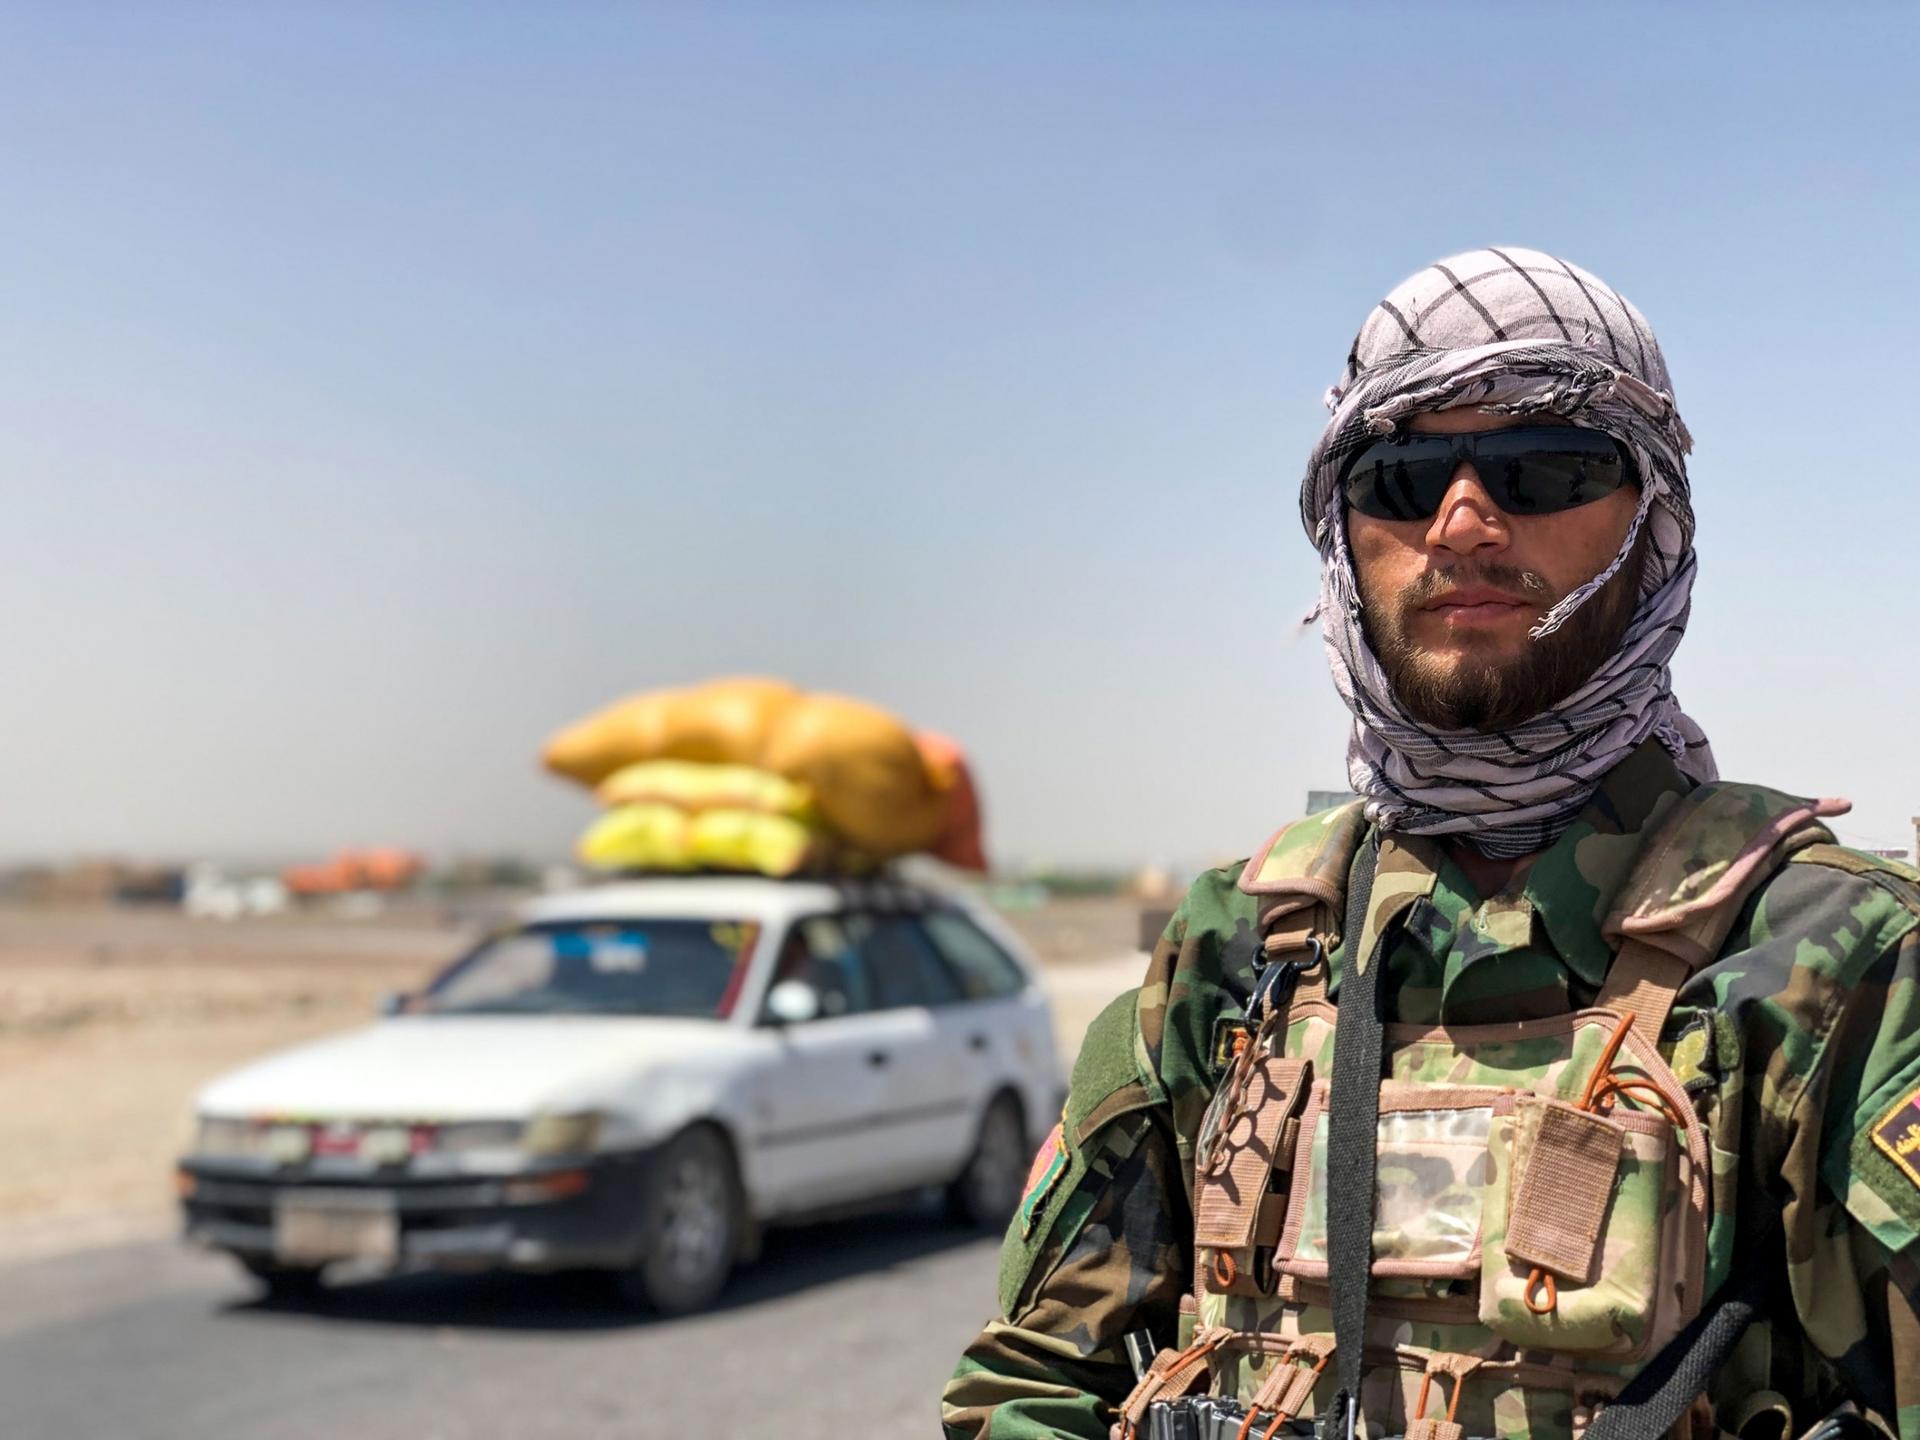 Ghand Agha, a member of the Afghan security forces has been manning a checkpoint at the entrance of Herat city for a month.